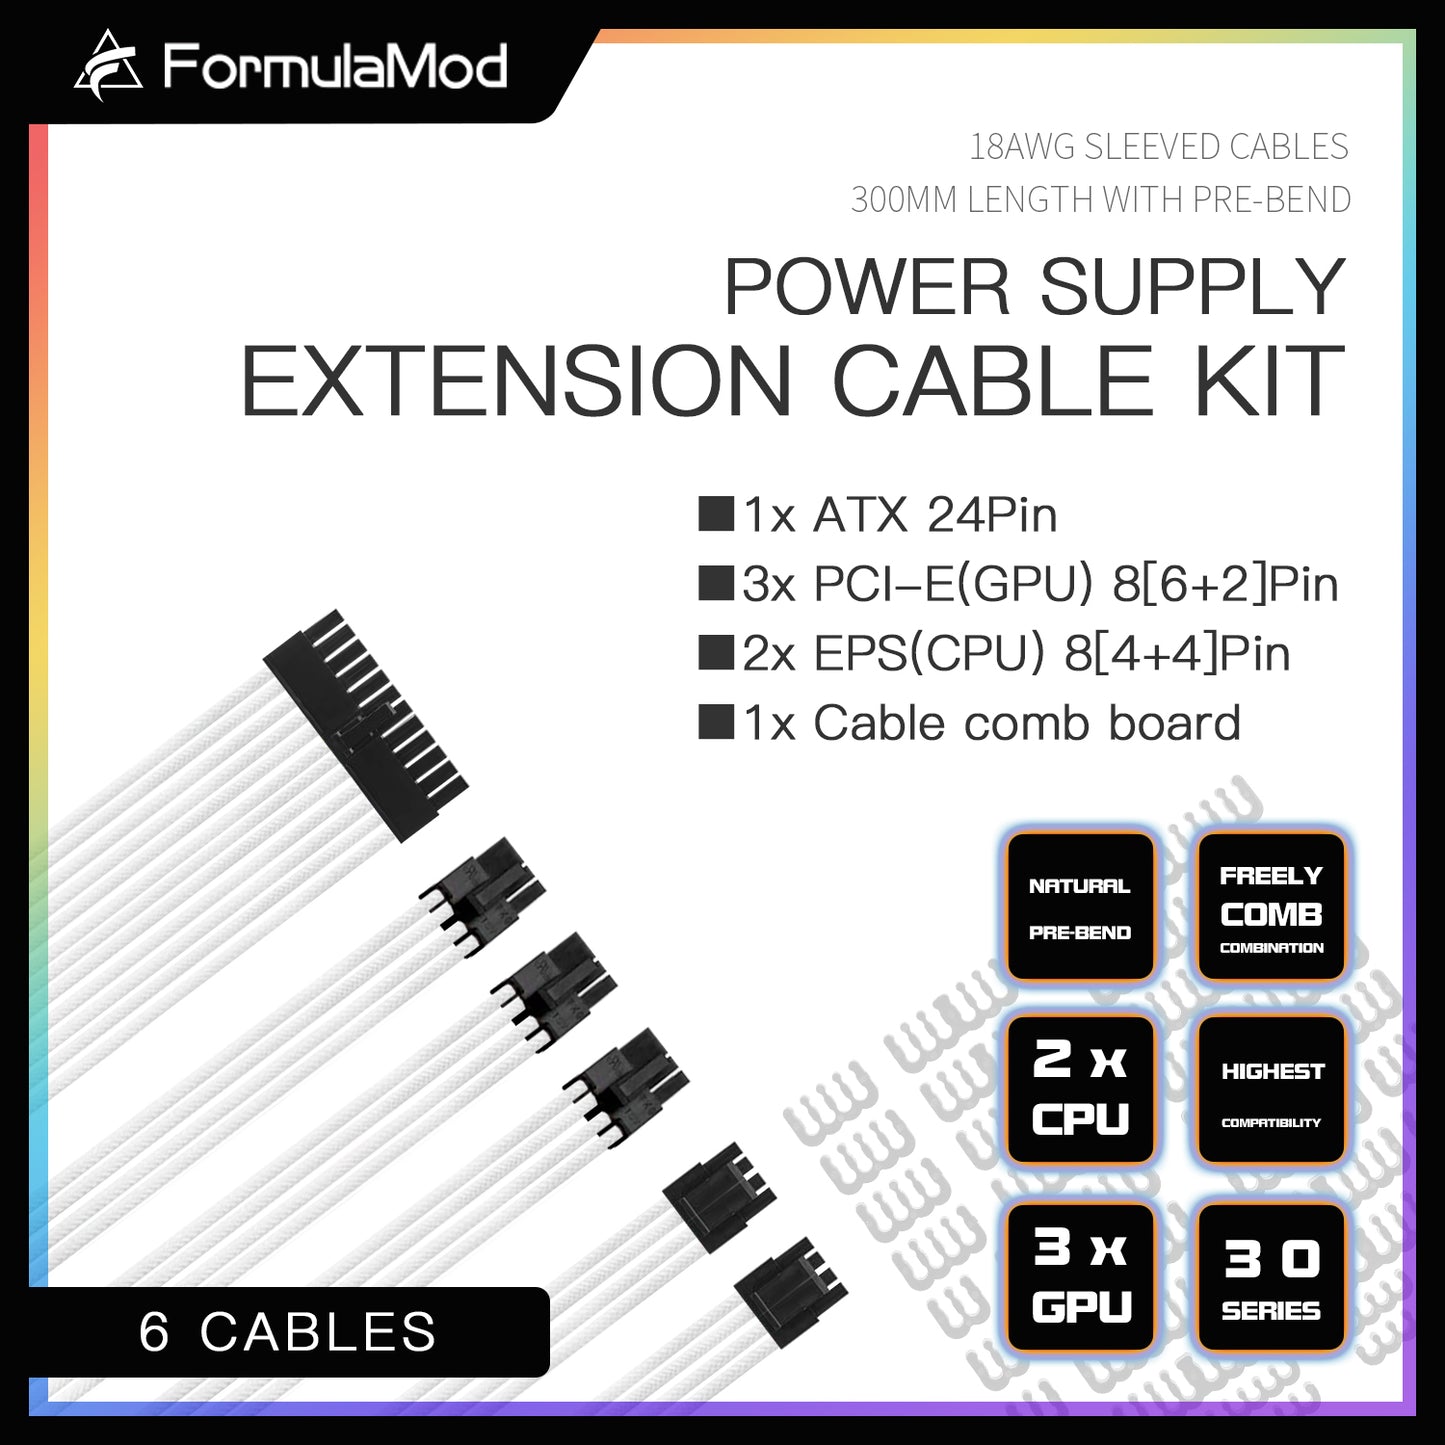 FormulaMod Advanced PSU Extension Cable Kit, Sleeved PSU Cable Combo, 300mm High Compatibility With Combs, ATX 24Pin / PCI-E GPU 8Pin / EPS CPU 8Pin, Fm-NCK1-I